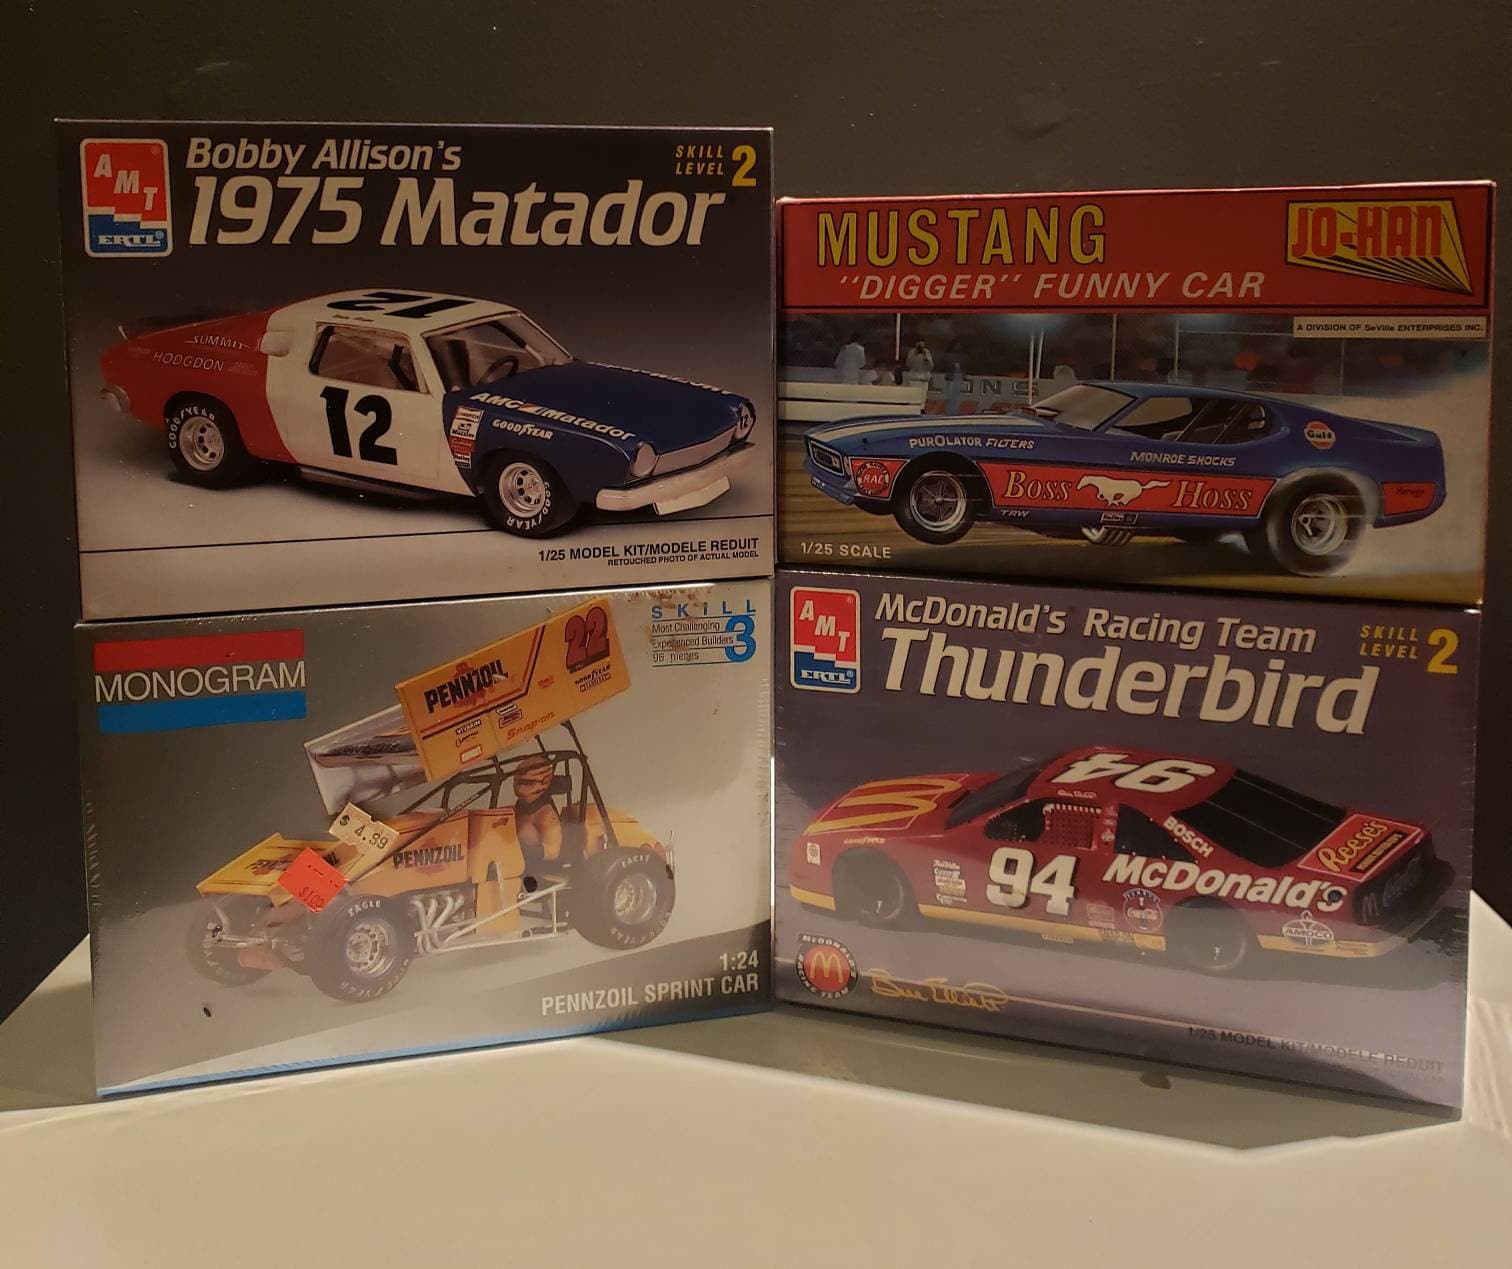 Nascar model kits, by Monogram, revell, AMT and more..